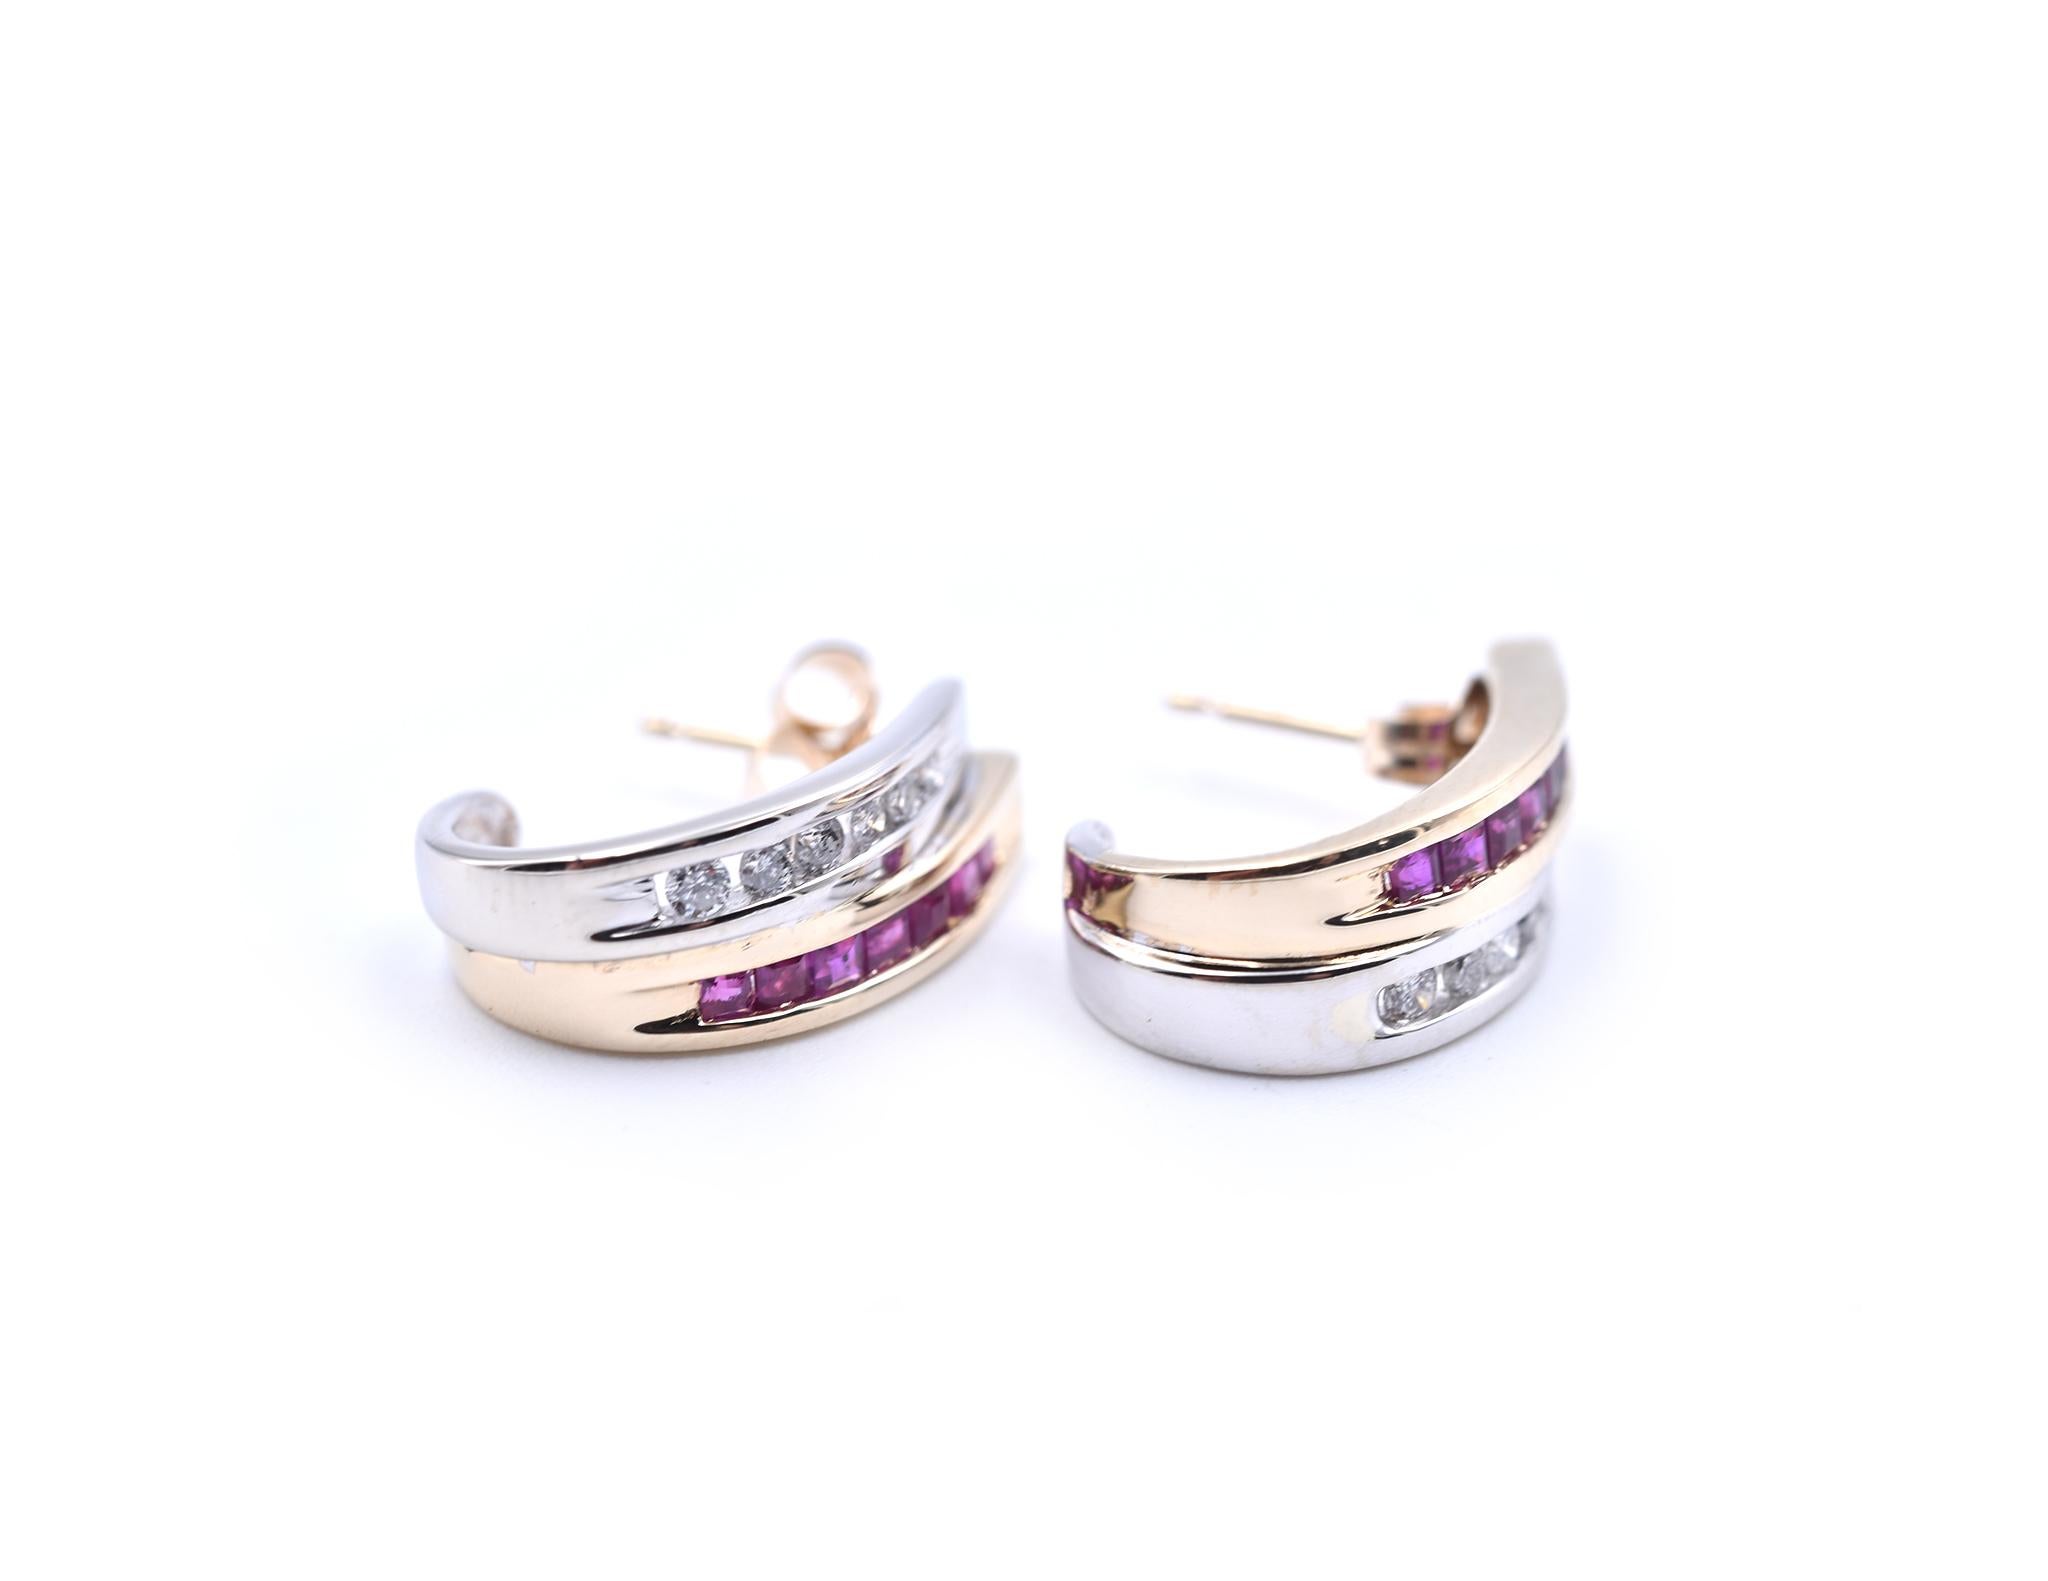 Designer: custom
Material: 14k yellow and White gold
Diamonds: 12 round brilliant cut= .20cttw
Dimensions: earrings are approximately 16.80mm by 6.40mm 
Fastenings: Posts with friction backs
Weight: 4.19 grams
